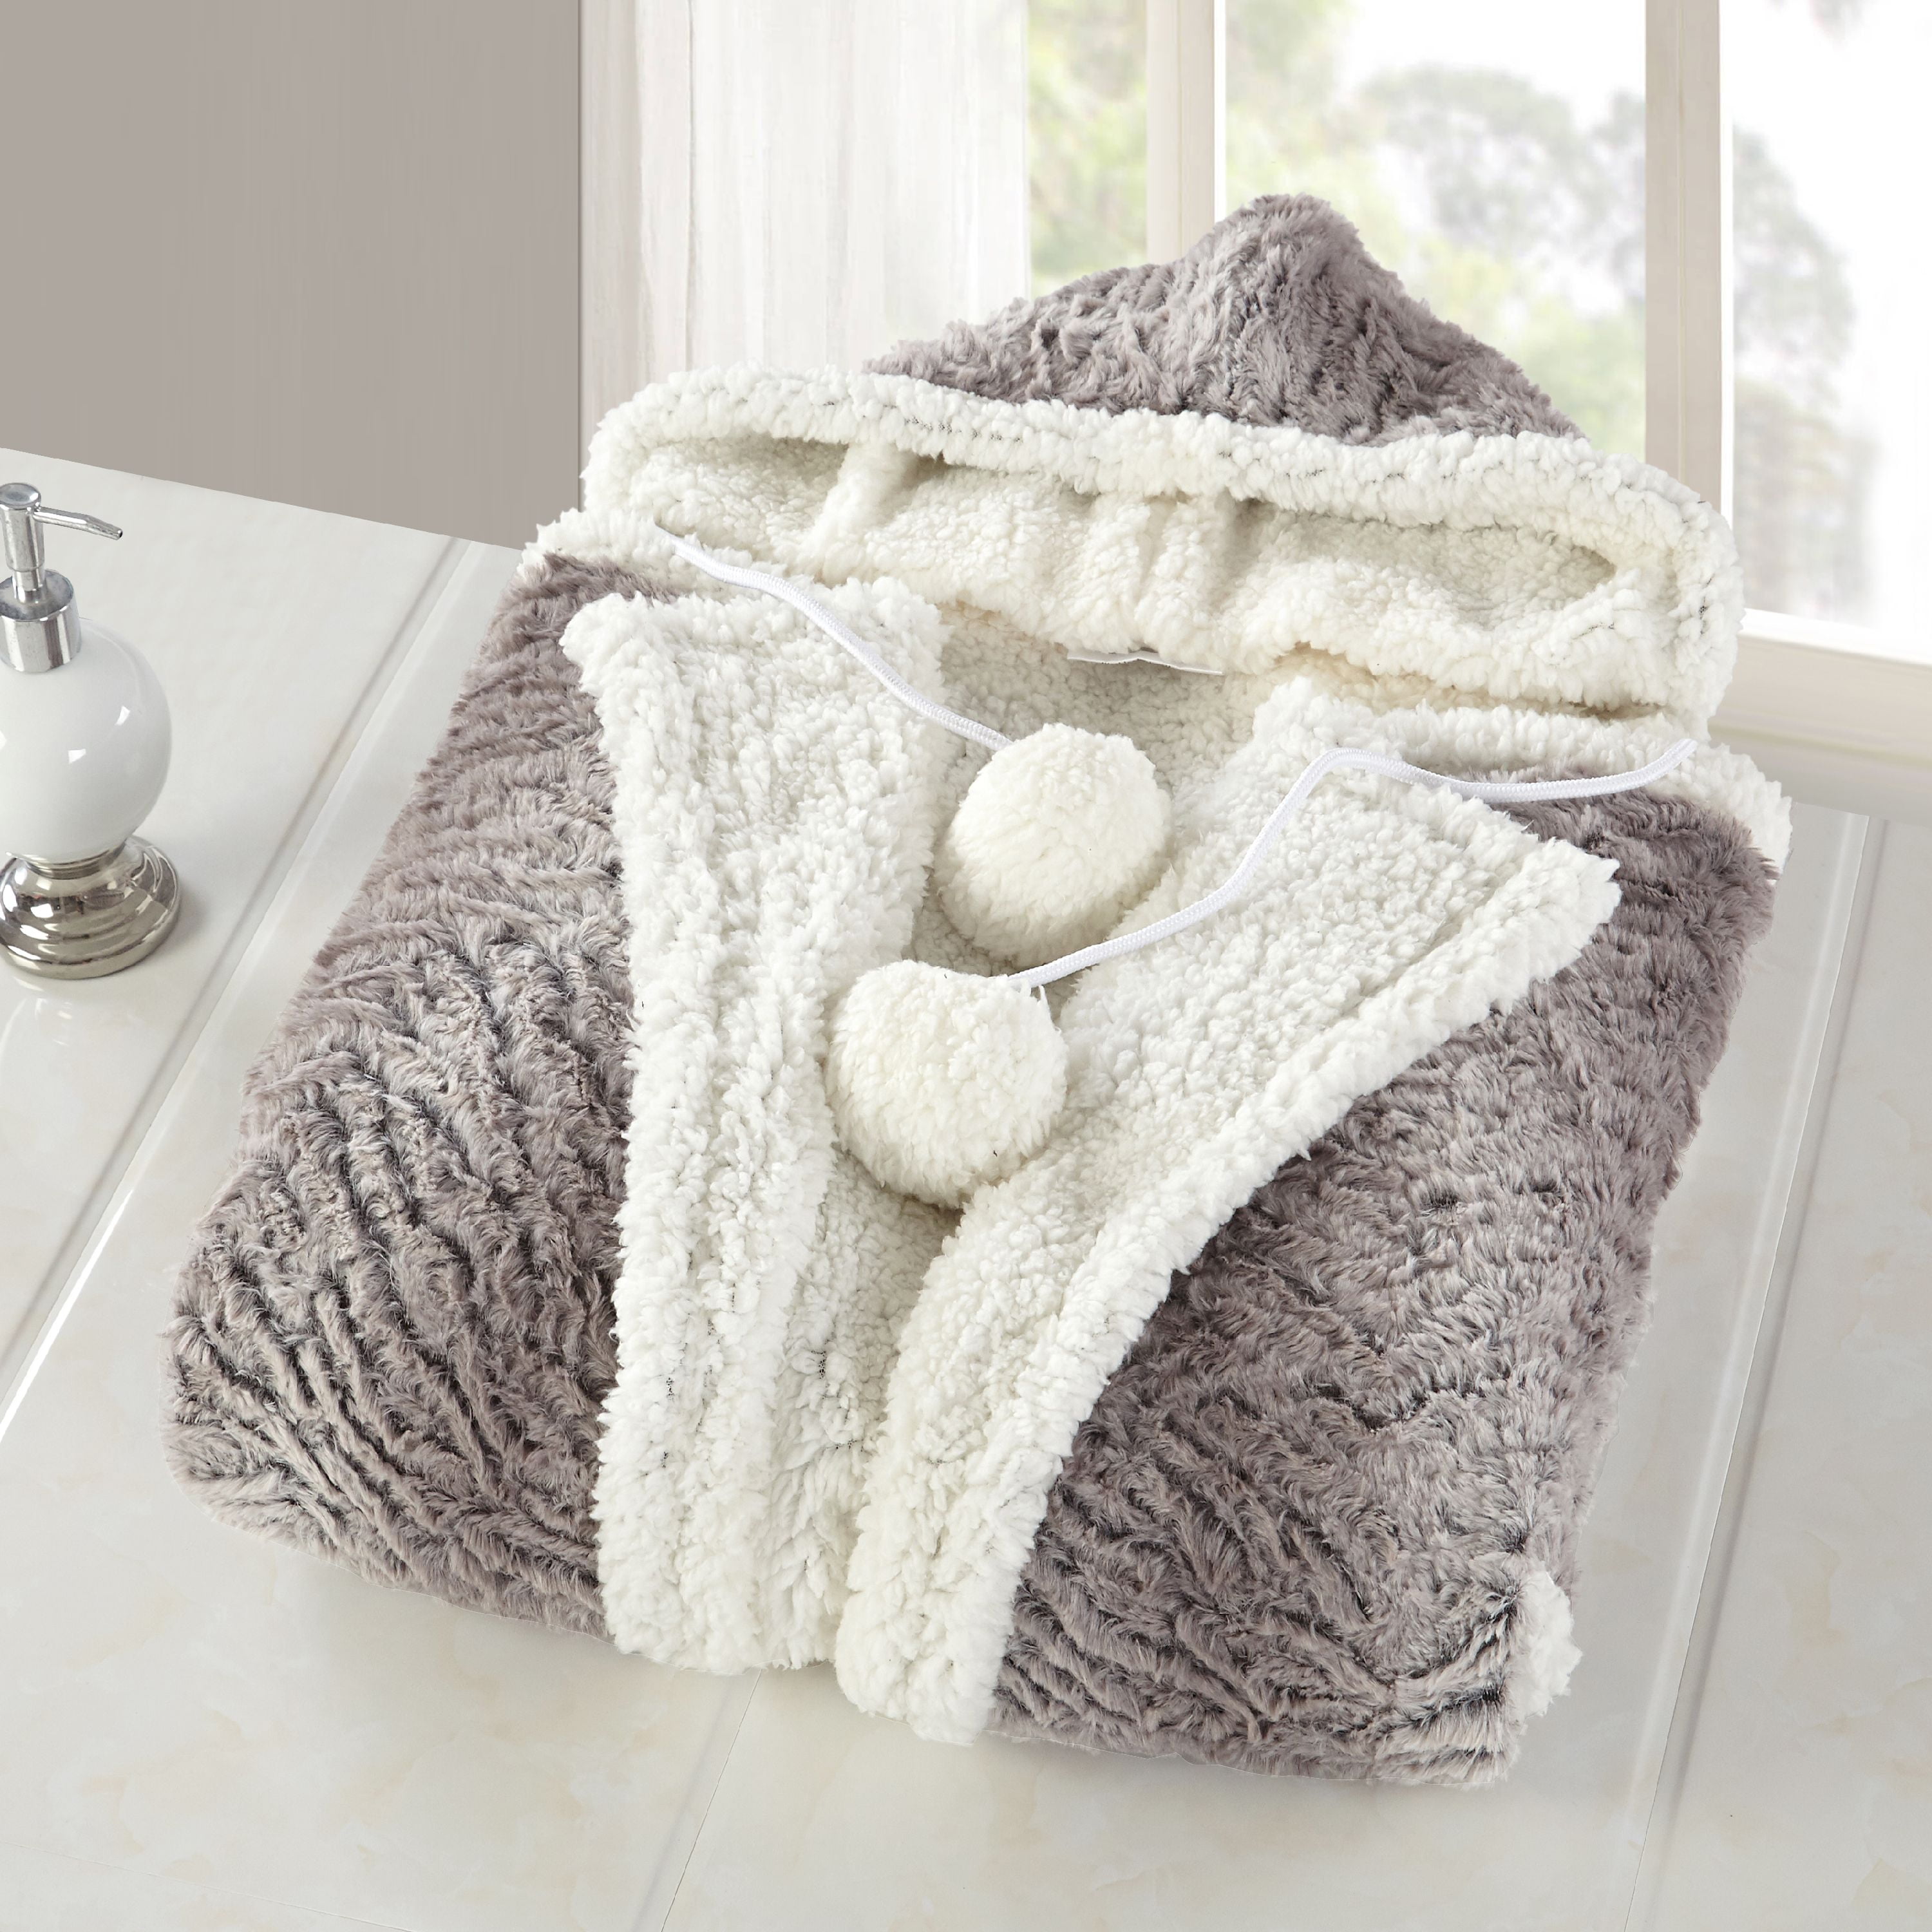 LUXURY SUPER SOFT SHERPA FAUX FUR HOODED SNUGGLE BLANKET THROW 4 COLOURS 